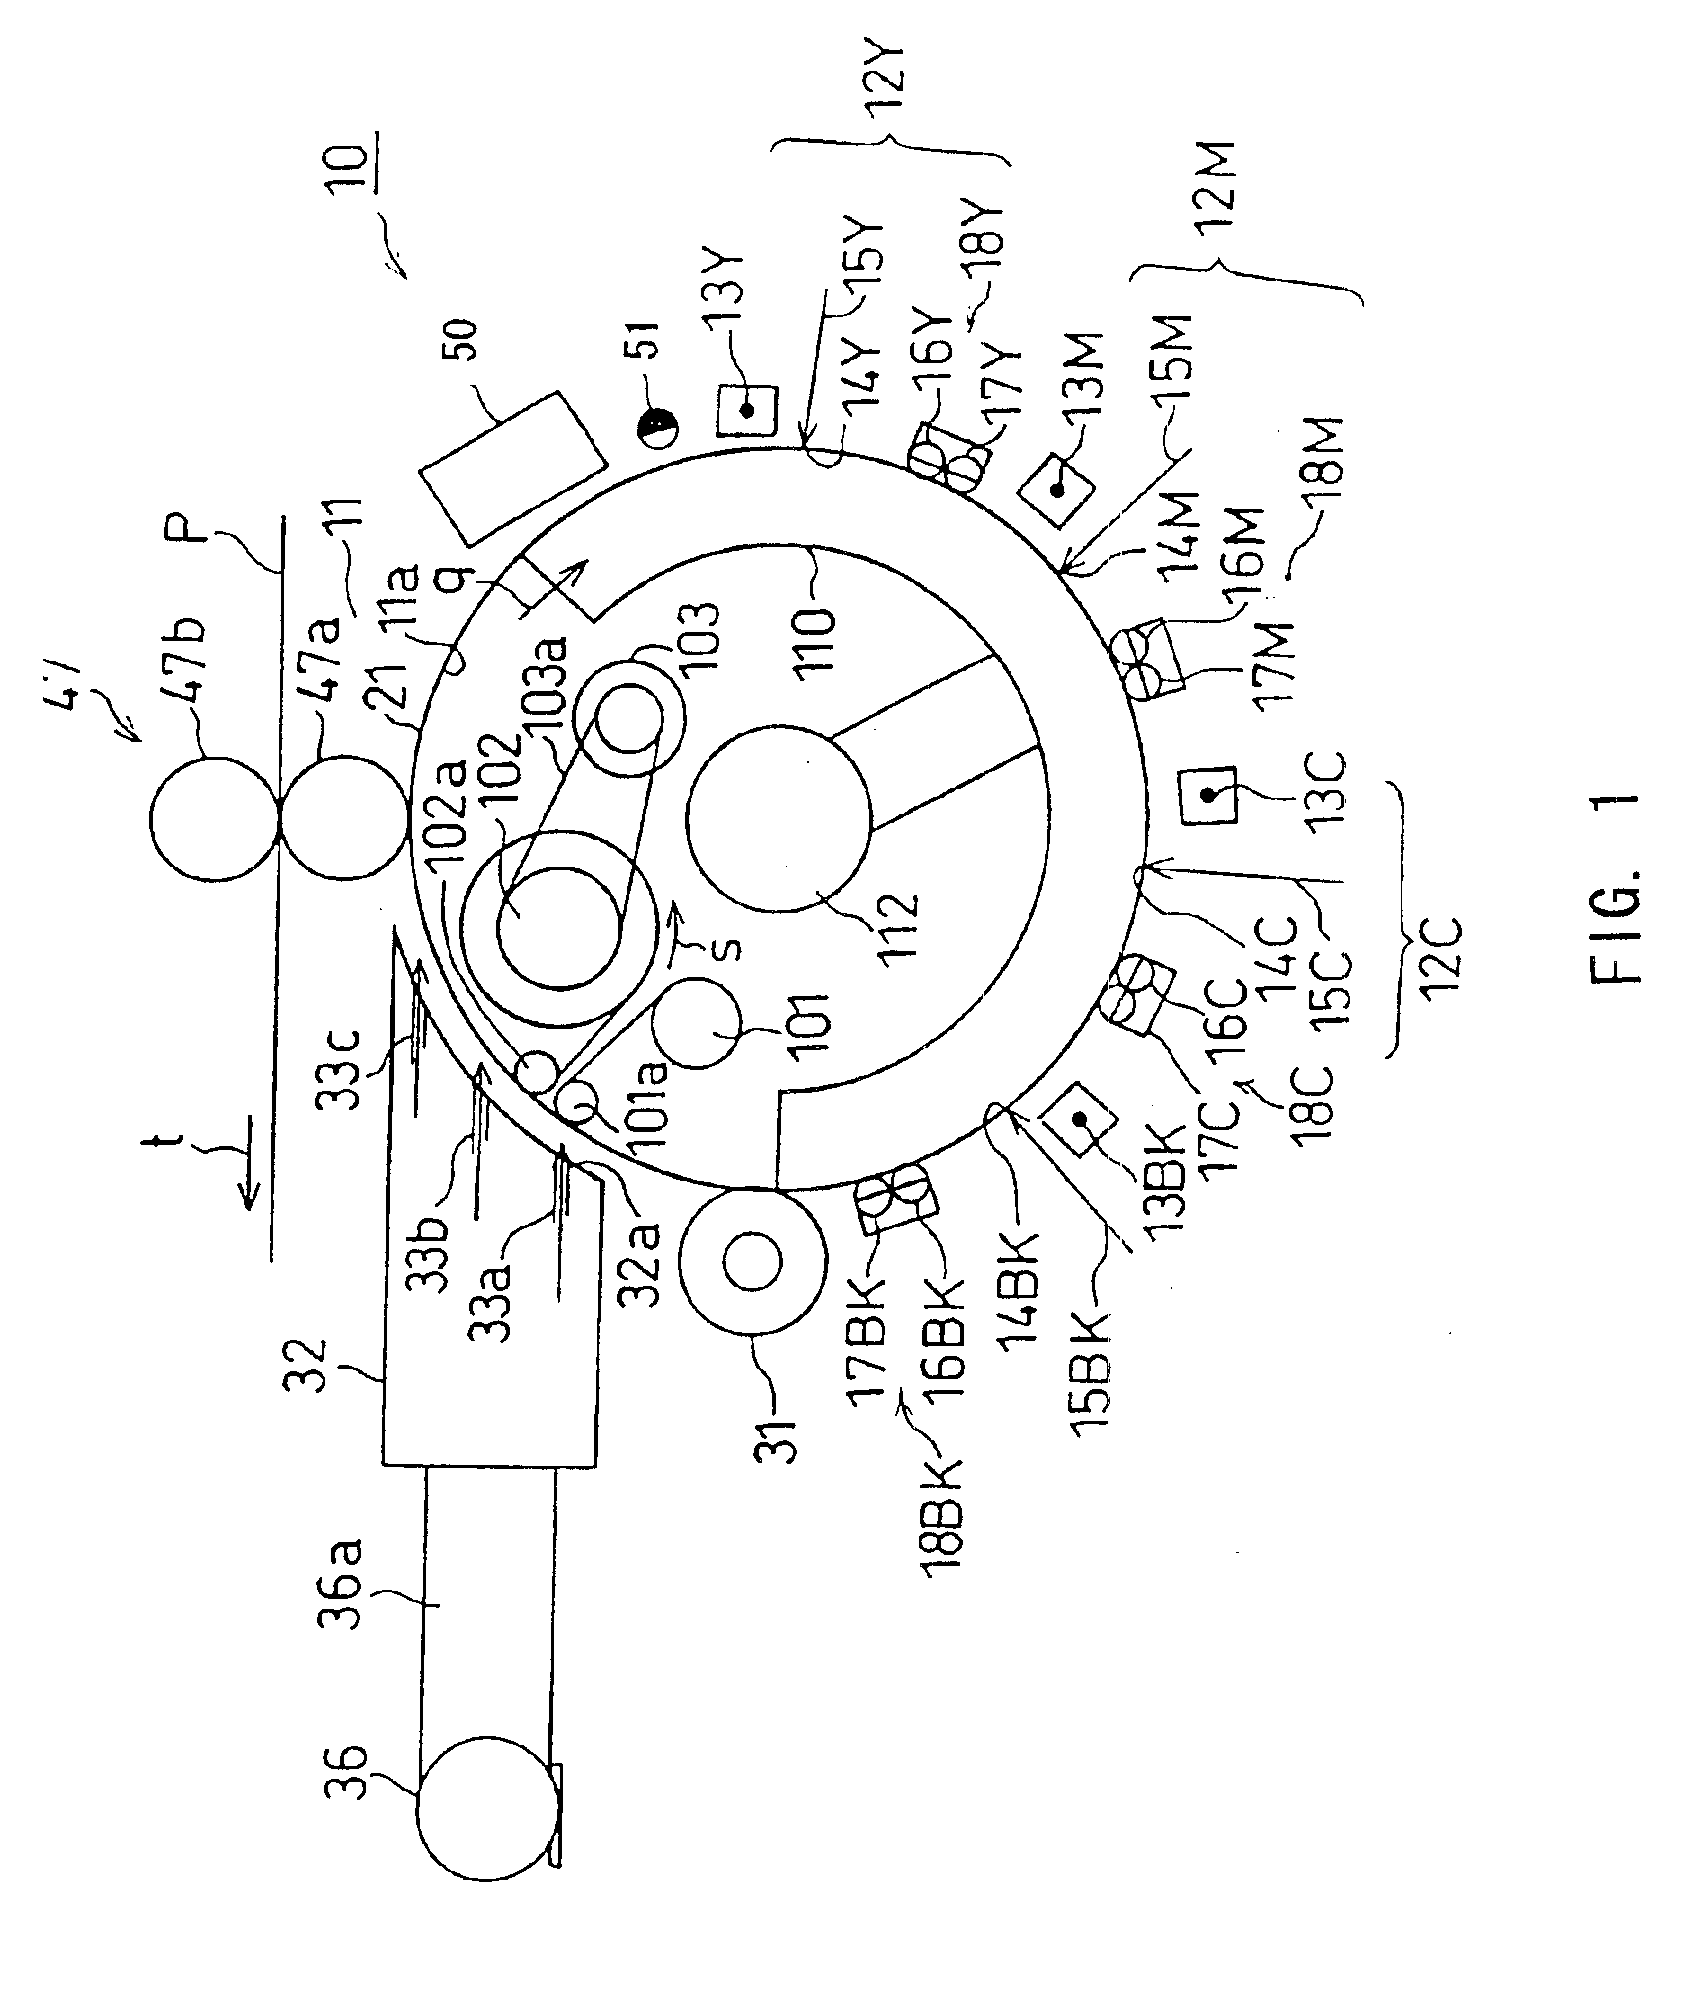 Photosensitive device, image forming apparatus and method for forming images